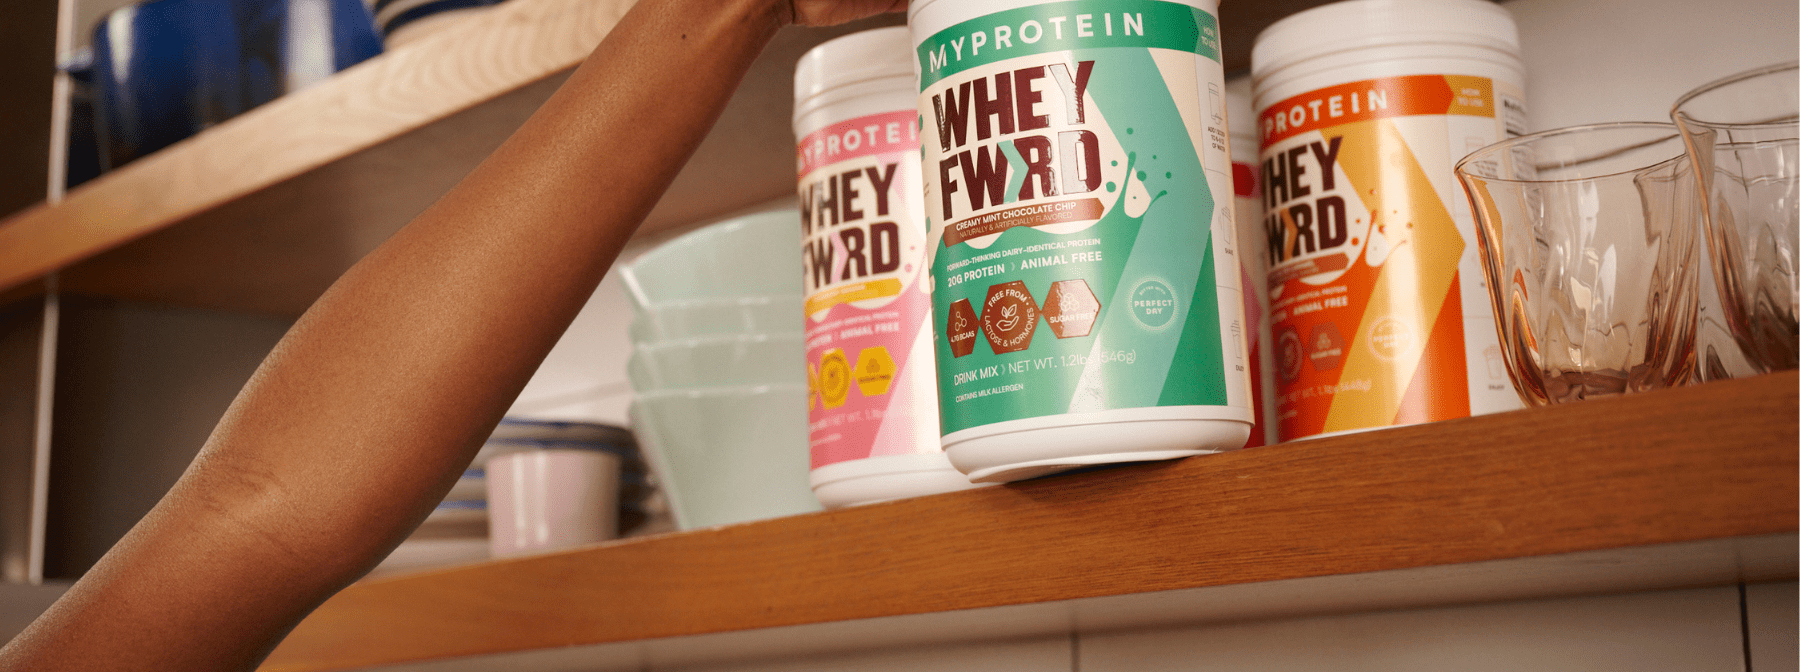 The Whey Forward Challenge